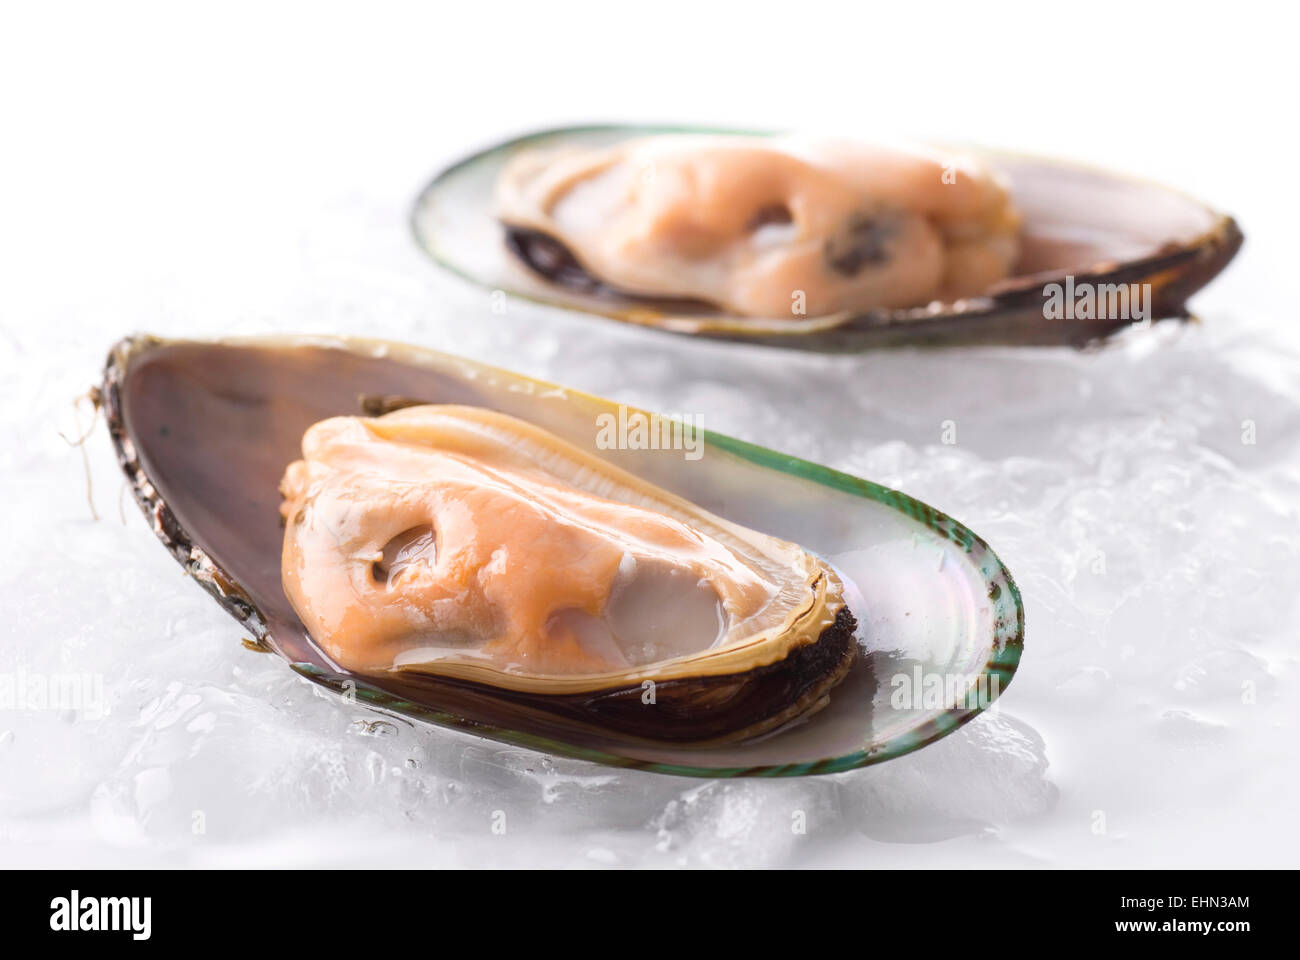 Two green mussels on ice. Stock Photo